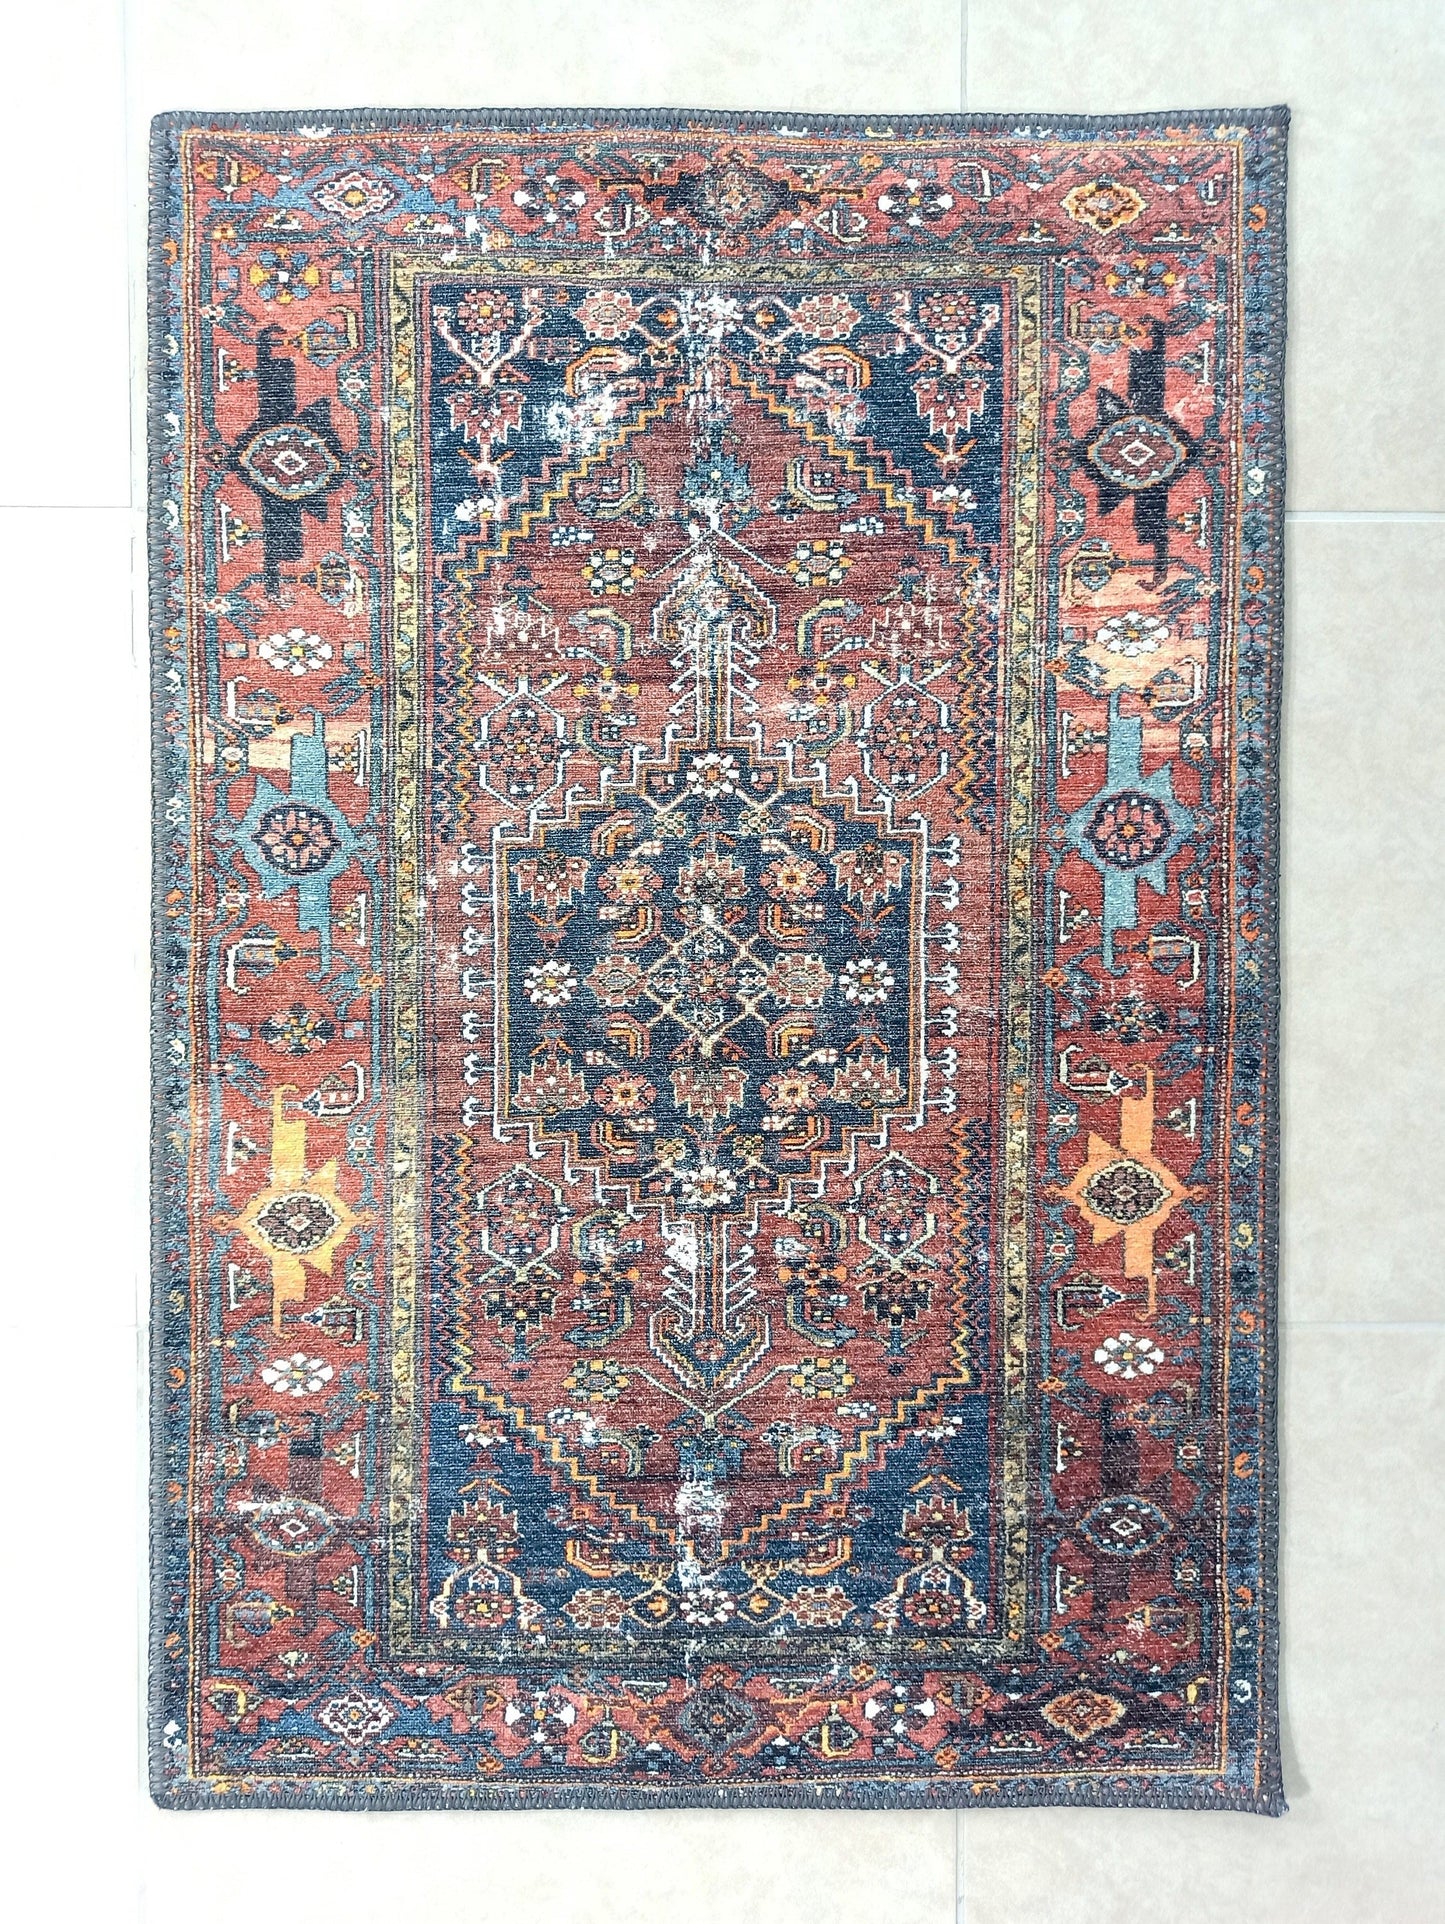 Zahra Mini Antique Persian Navy blue Red Rug